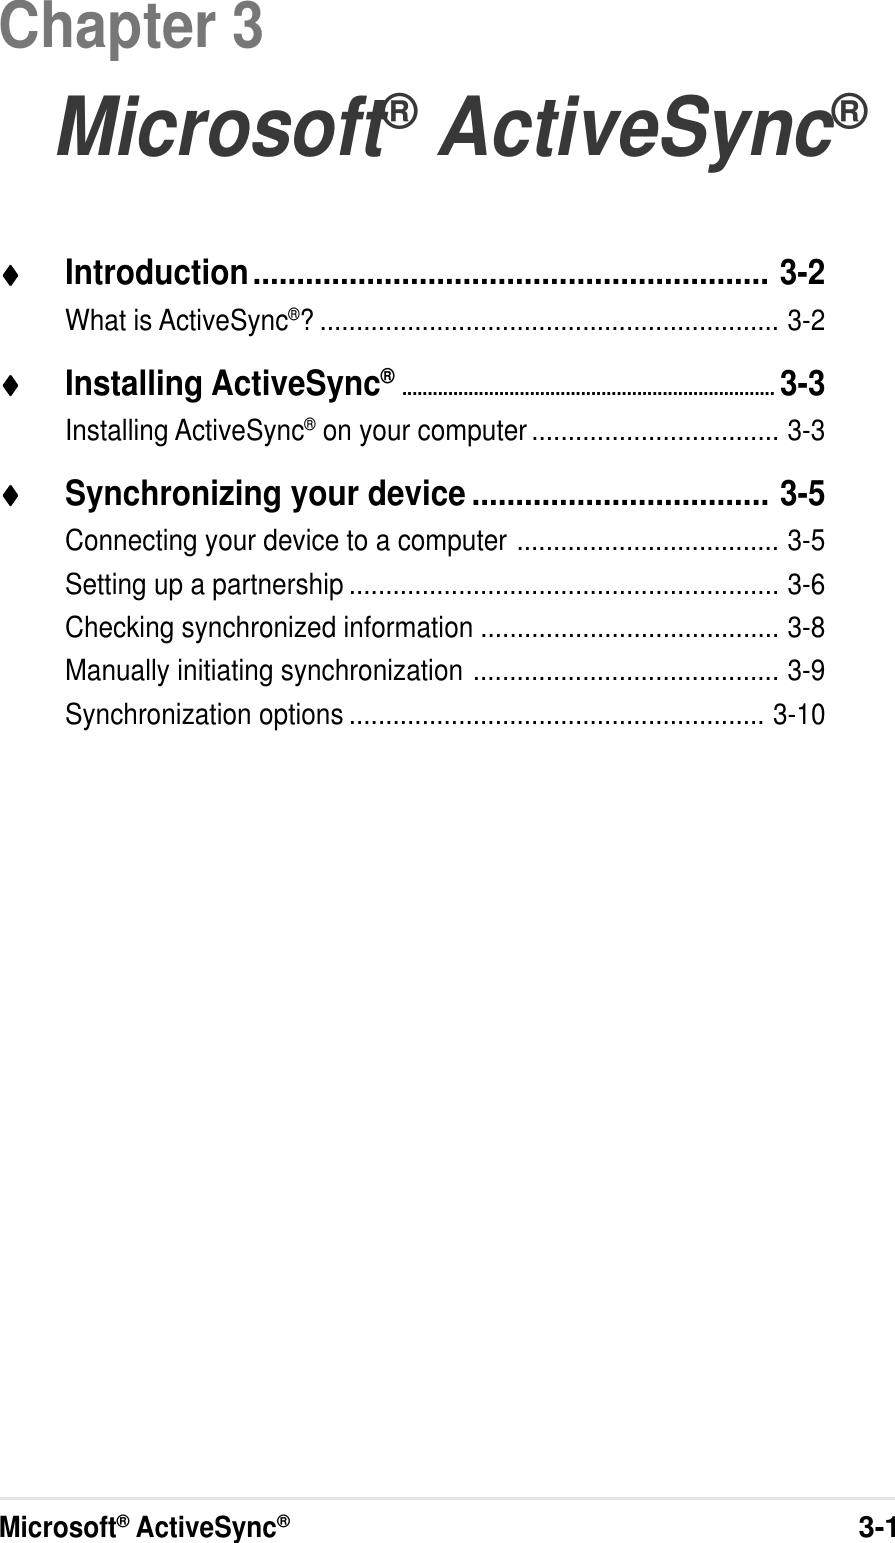 Microsoft® ActiveSync®3-1Chapter 3Microsoft® ActiveSync®♦♦♦♦♦Introduction........................................................... 3-2What is ActiveSync®? ............................................................... 3-2♦♦♦♦♦Installing ActiveSync®......................................................................... 3-3Installing ActiveSync® on your computer .................................. 3-3♦♦♦♦♦Synchronizing your device .................................. 3-5Connecting your device to a computer .................................... 3-5Setting up a partnership ........................................................... 3-6Checking synchronized information ......................................... 3-8Manually initiating synchronization .......................................... 3-9Synchronization options ......................................................... 3-10